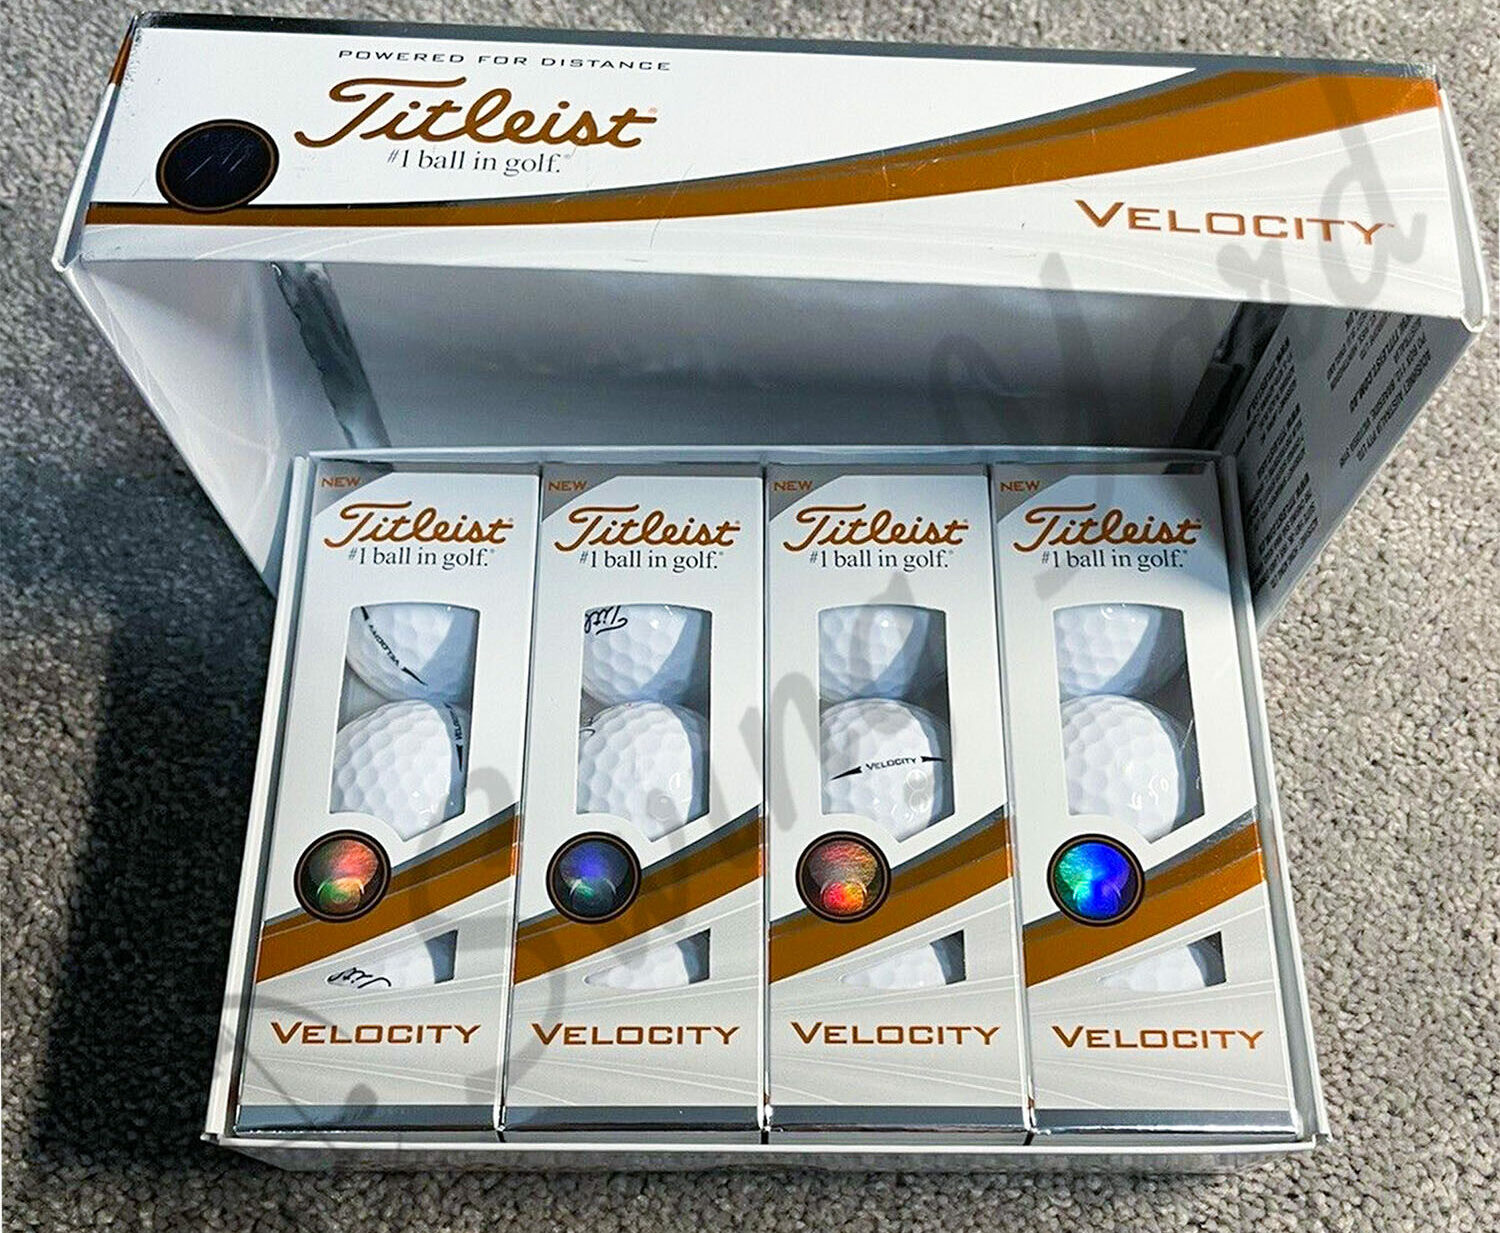 A Titleist Velocity dedicated to high handicappers and biginners golfer